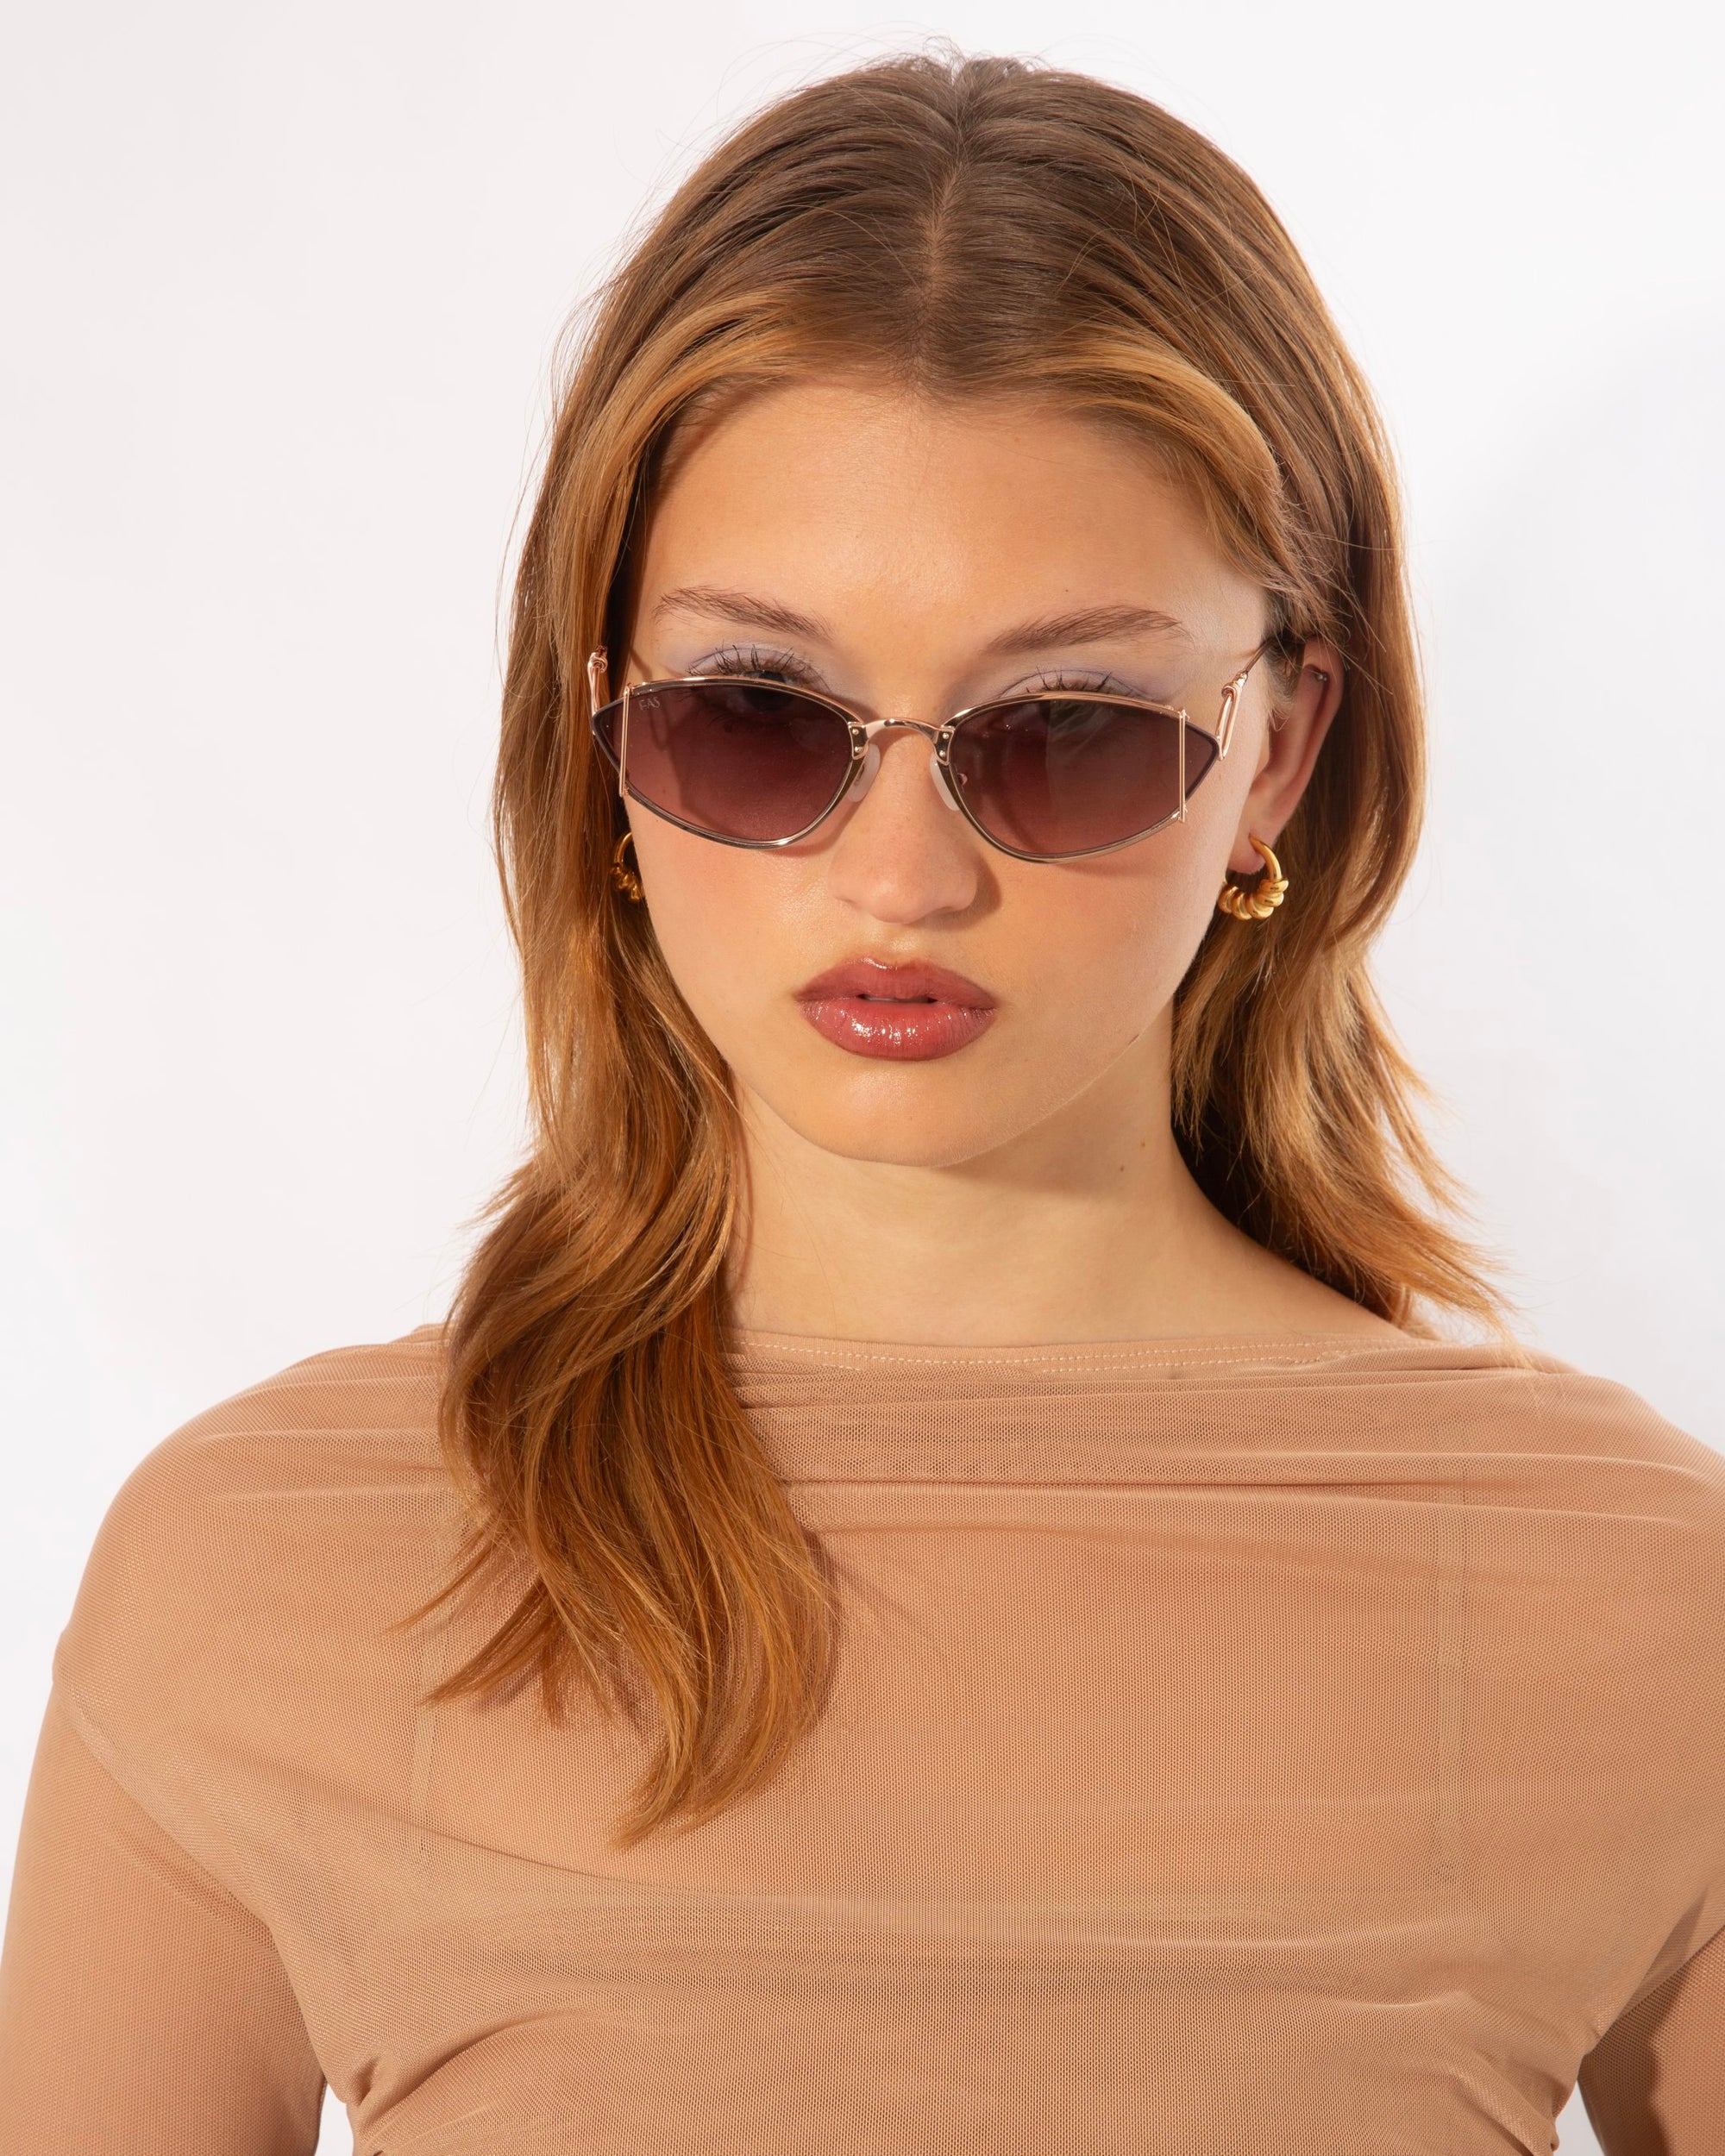 A woman with light brown hair and wearing stylish For Art&#39;s Sake® Ornate sunglasses that offer 100% UVA &amp; UVB protection looks at the camera. She is dressed in a light beige, semi-sheer top, and has gold hoop earrings. The background is plain white.